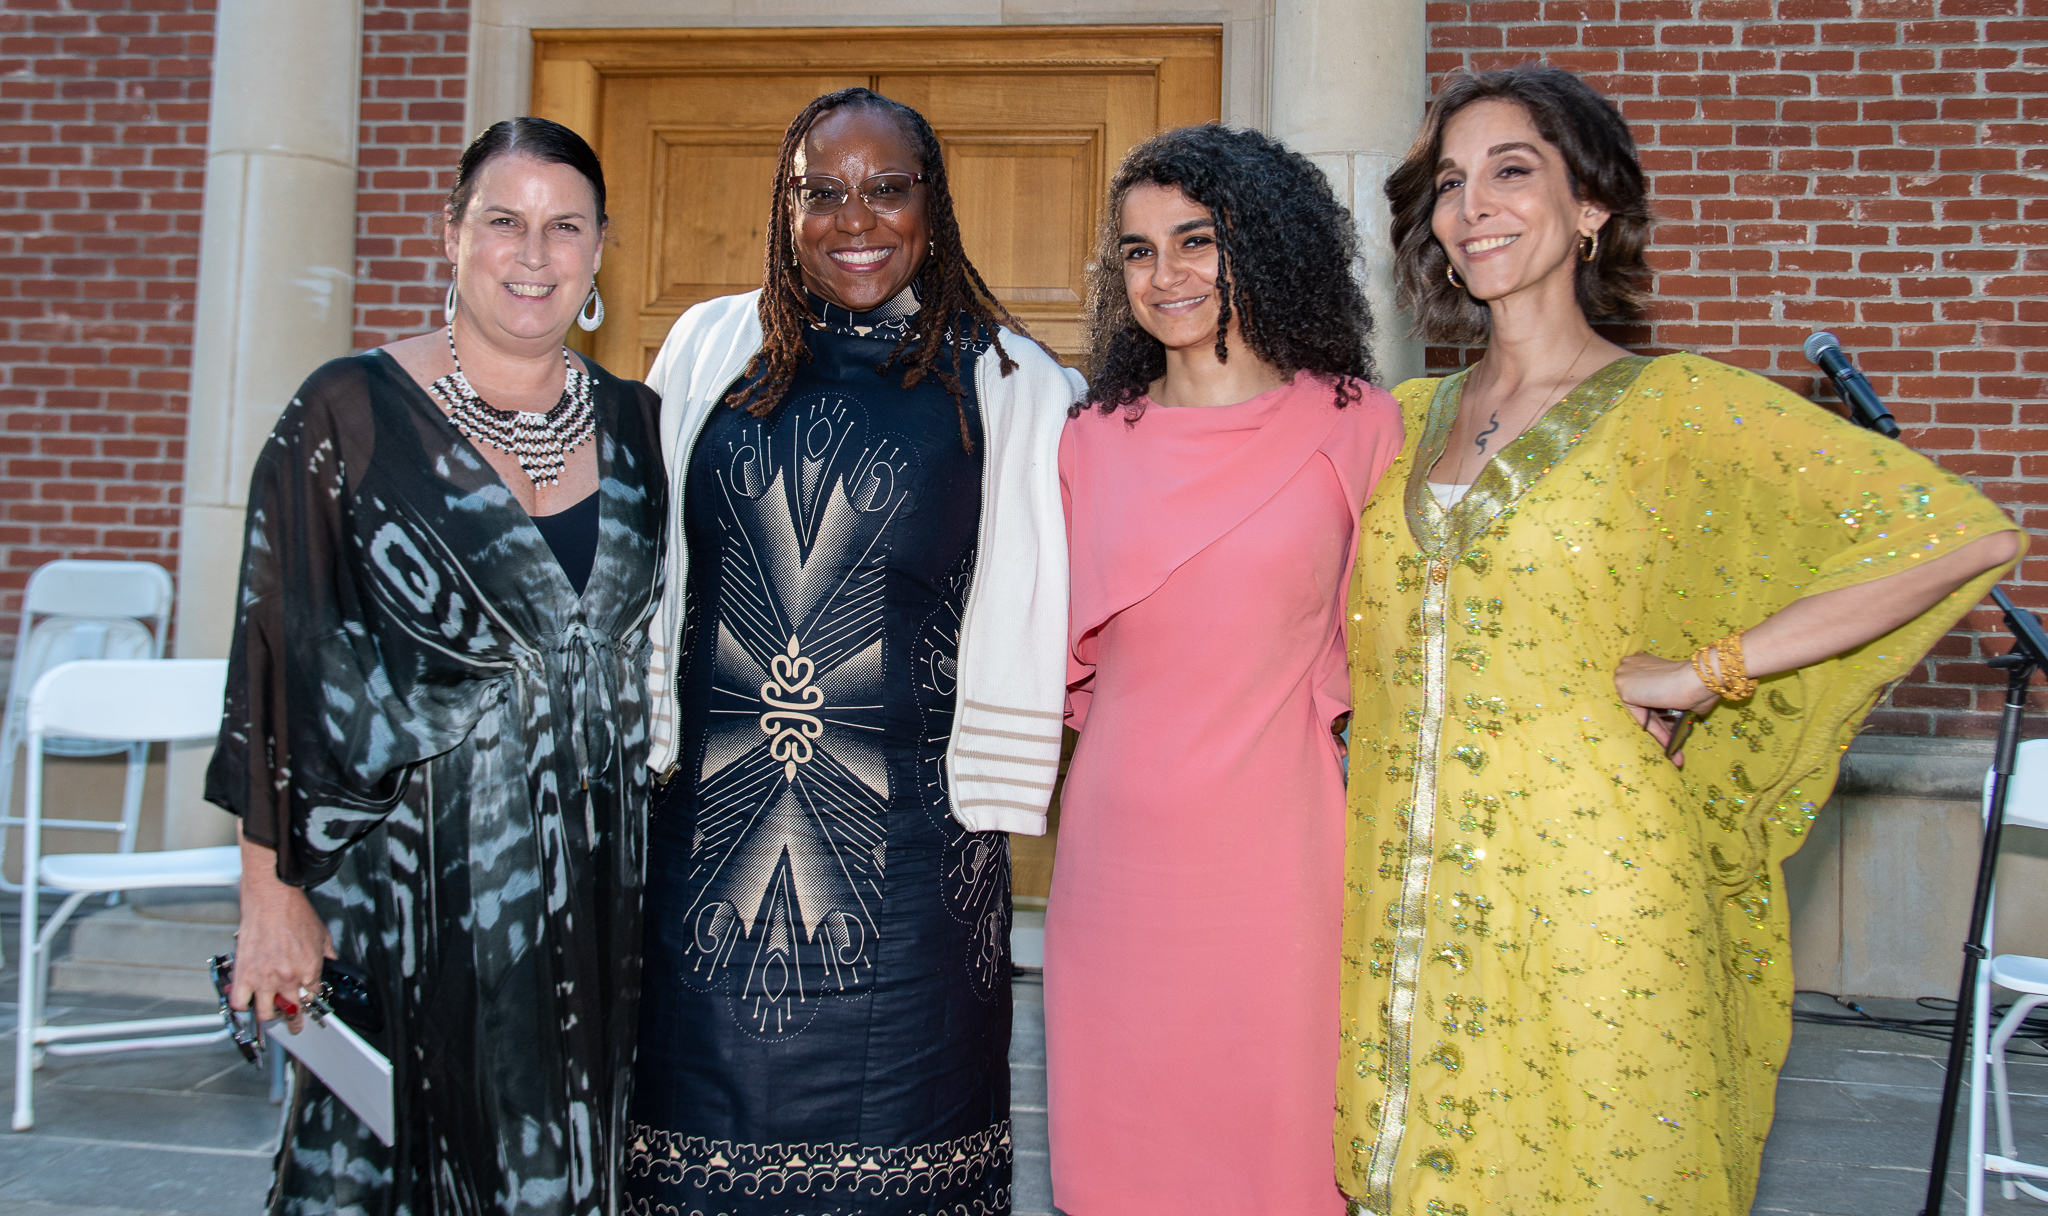 Panelists Laurie DeJong, Dr. Florence Rolston, Rahma Soliman, Pooya Mohseni at Andromeda's Sisters Arts & Advocacy Gala